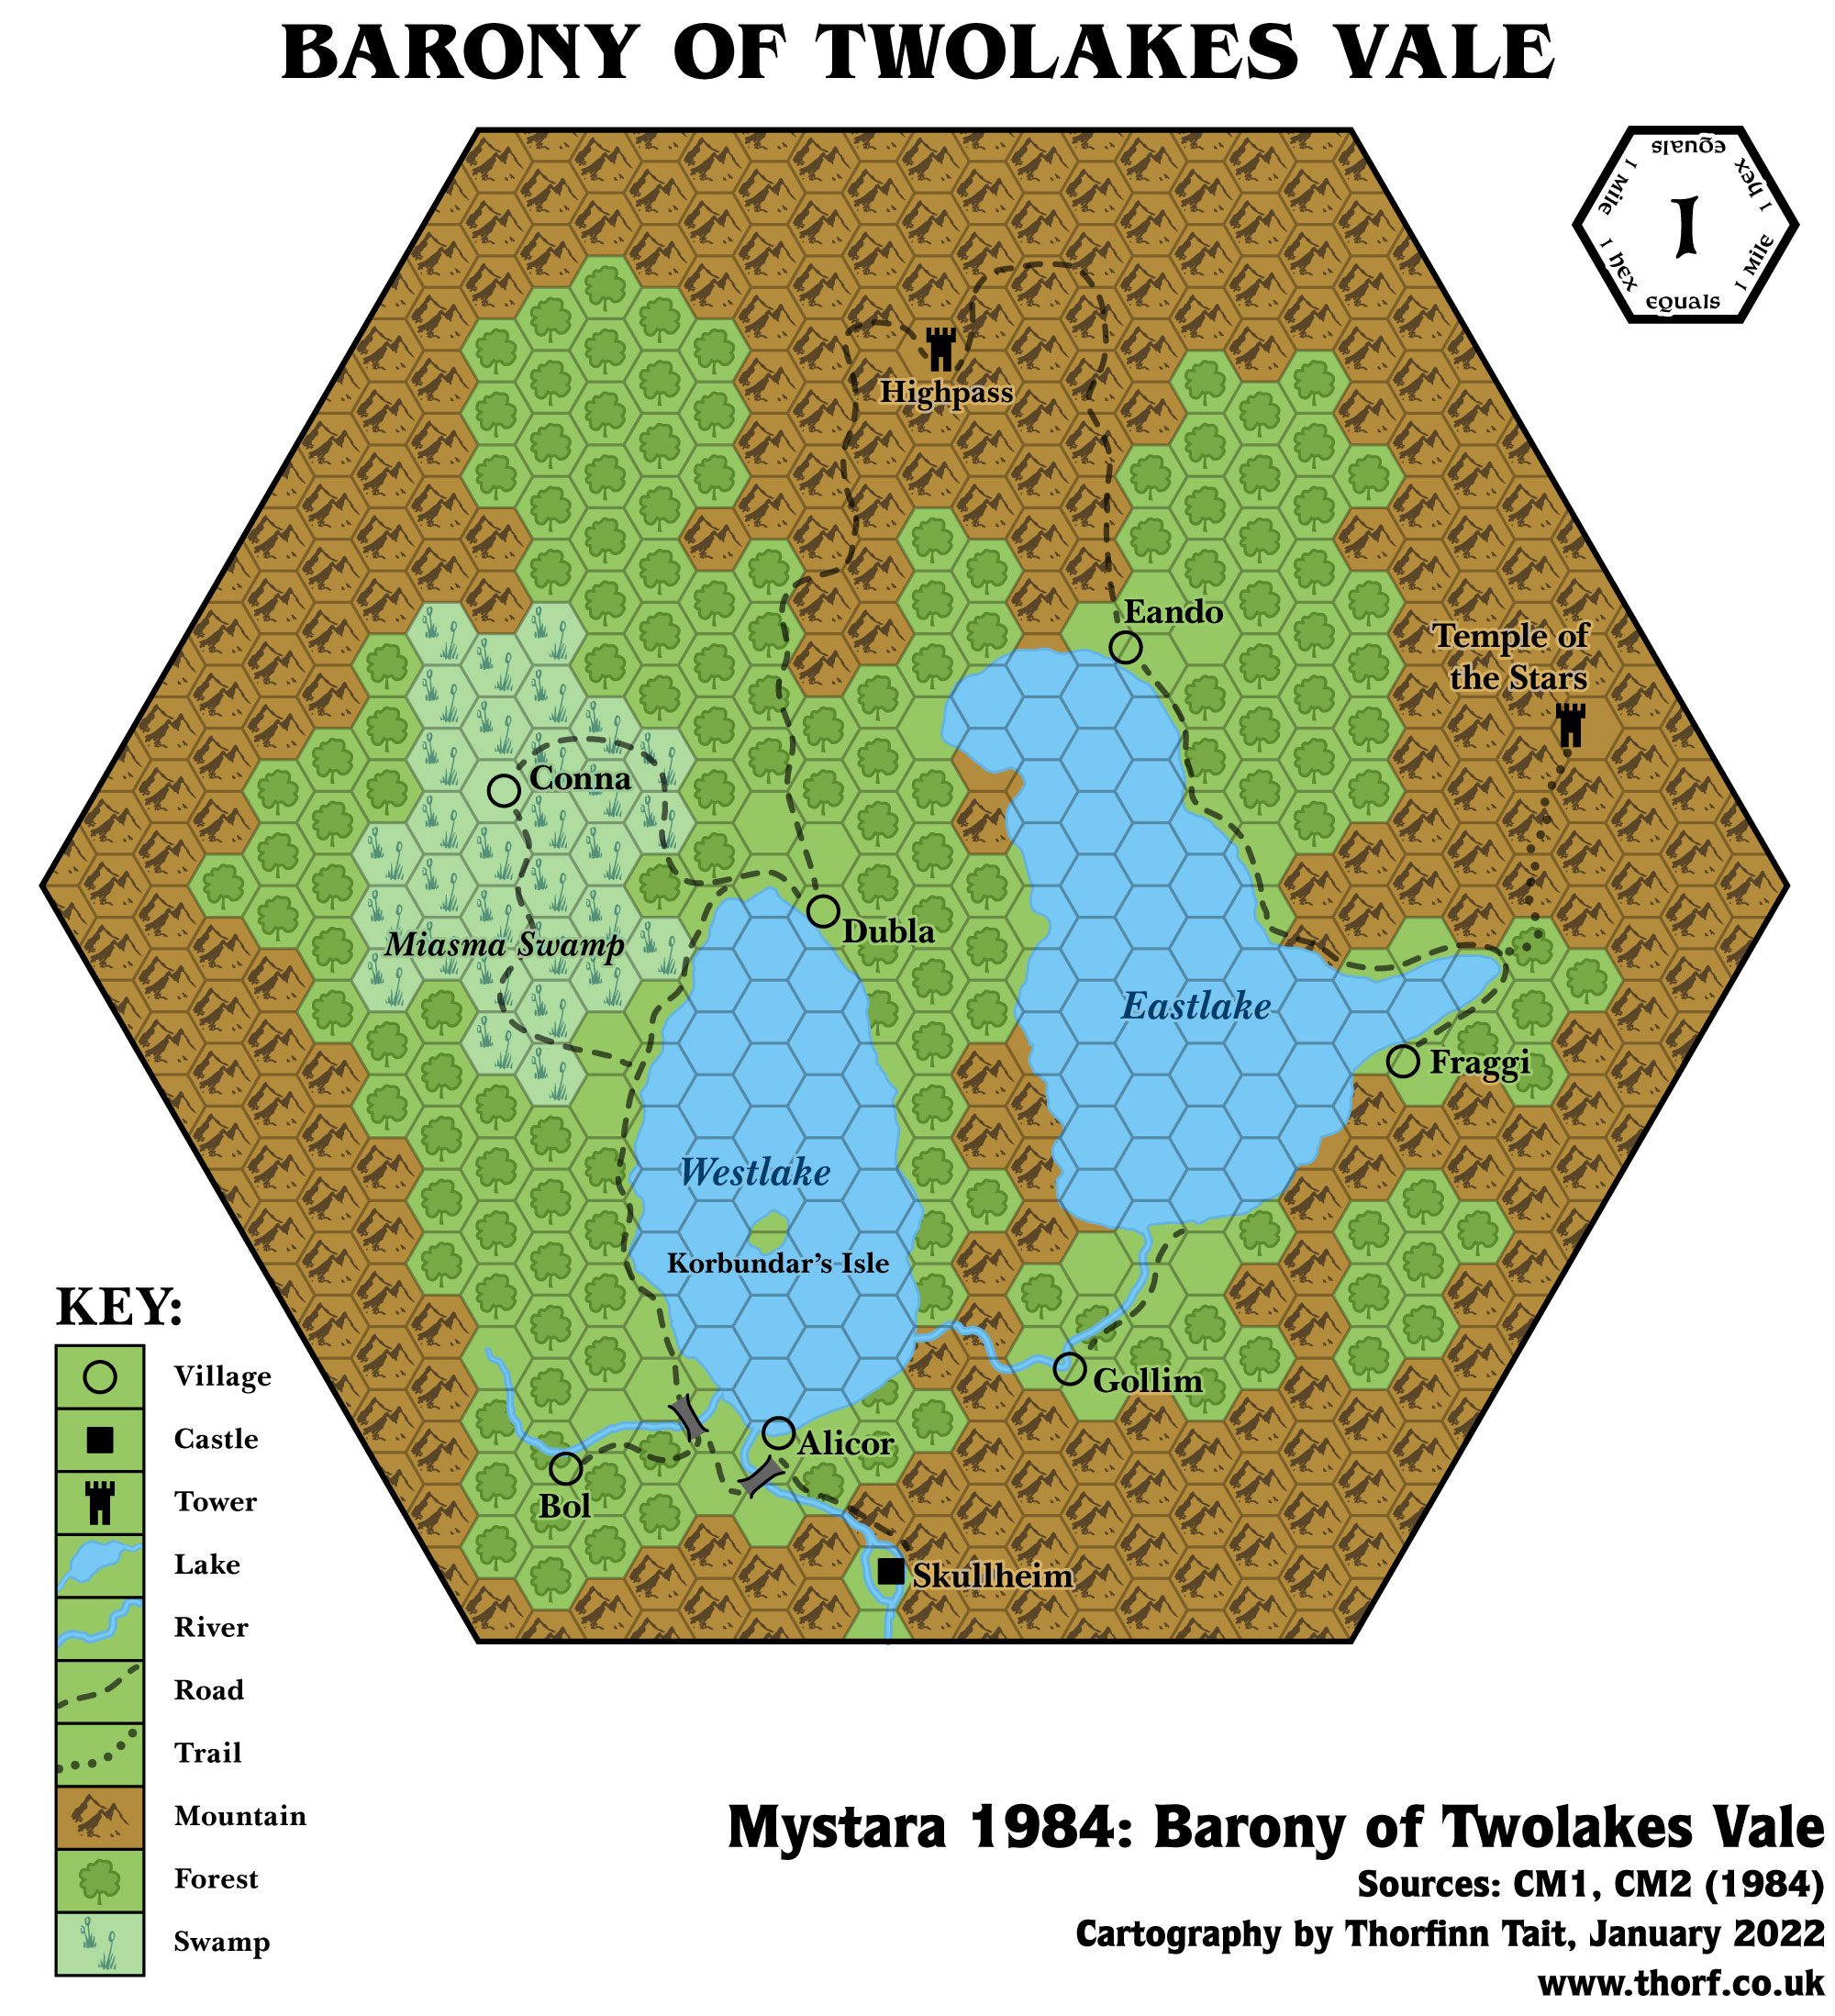 The Barony of Twolakes Vale, 1 mile per hex (1984)